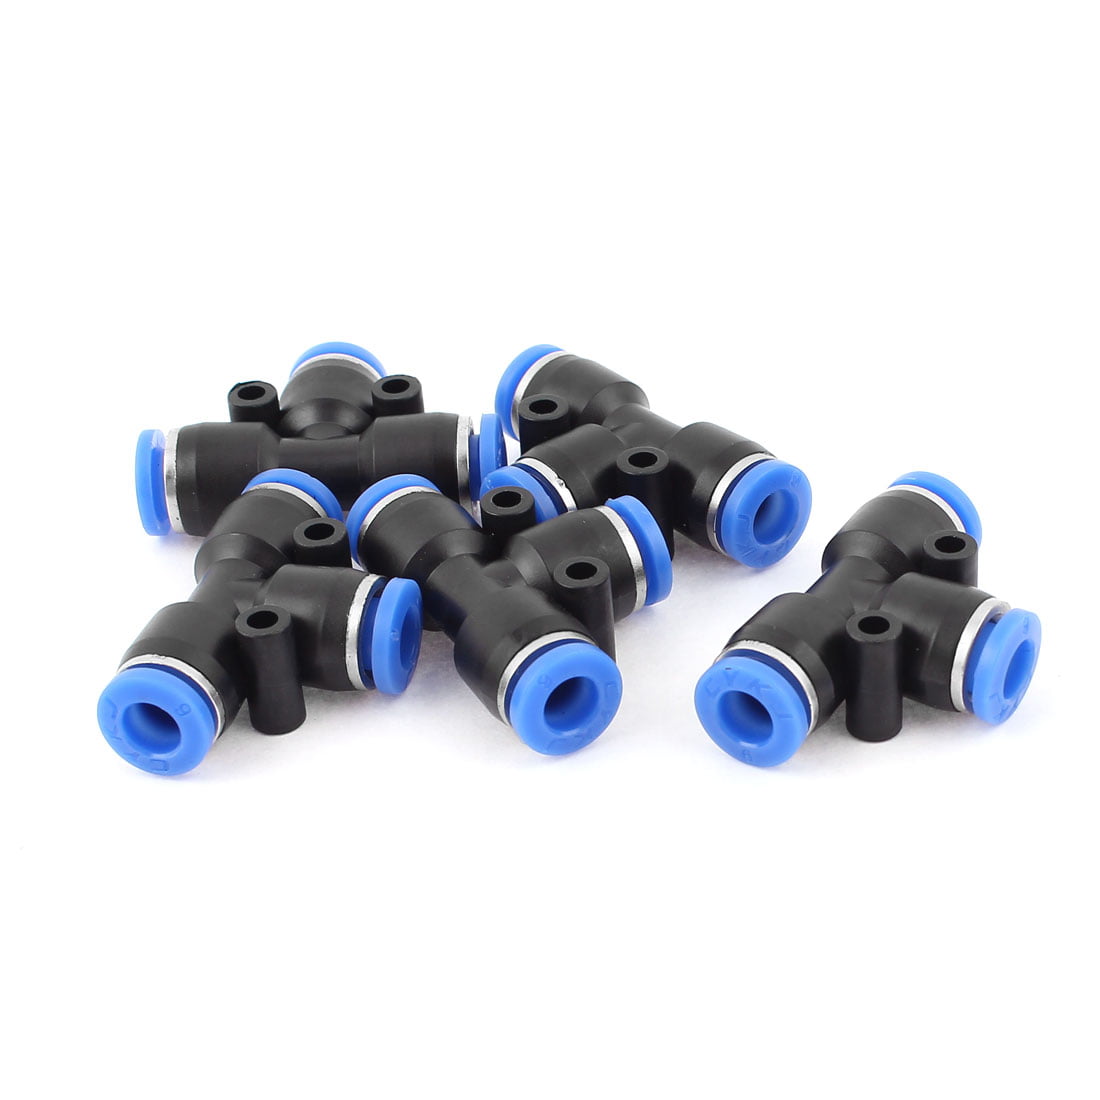 1x 8mm to 6mm Pneumatic Air Pipe Quick Fitting Coupler Connector Adapter 